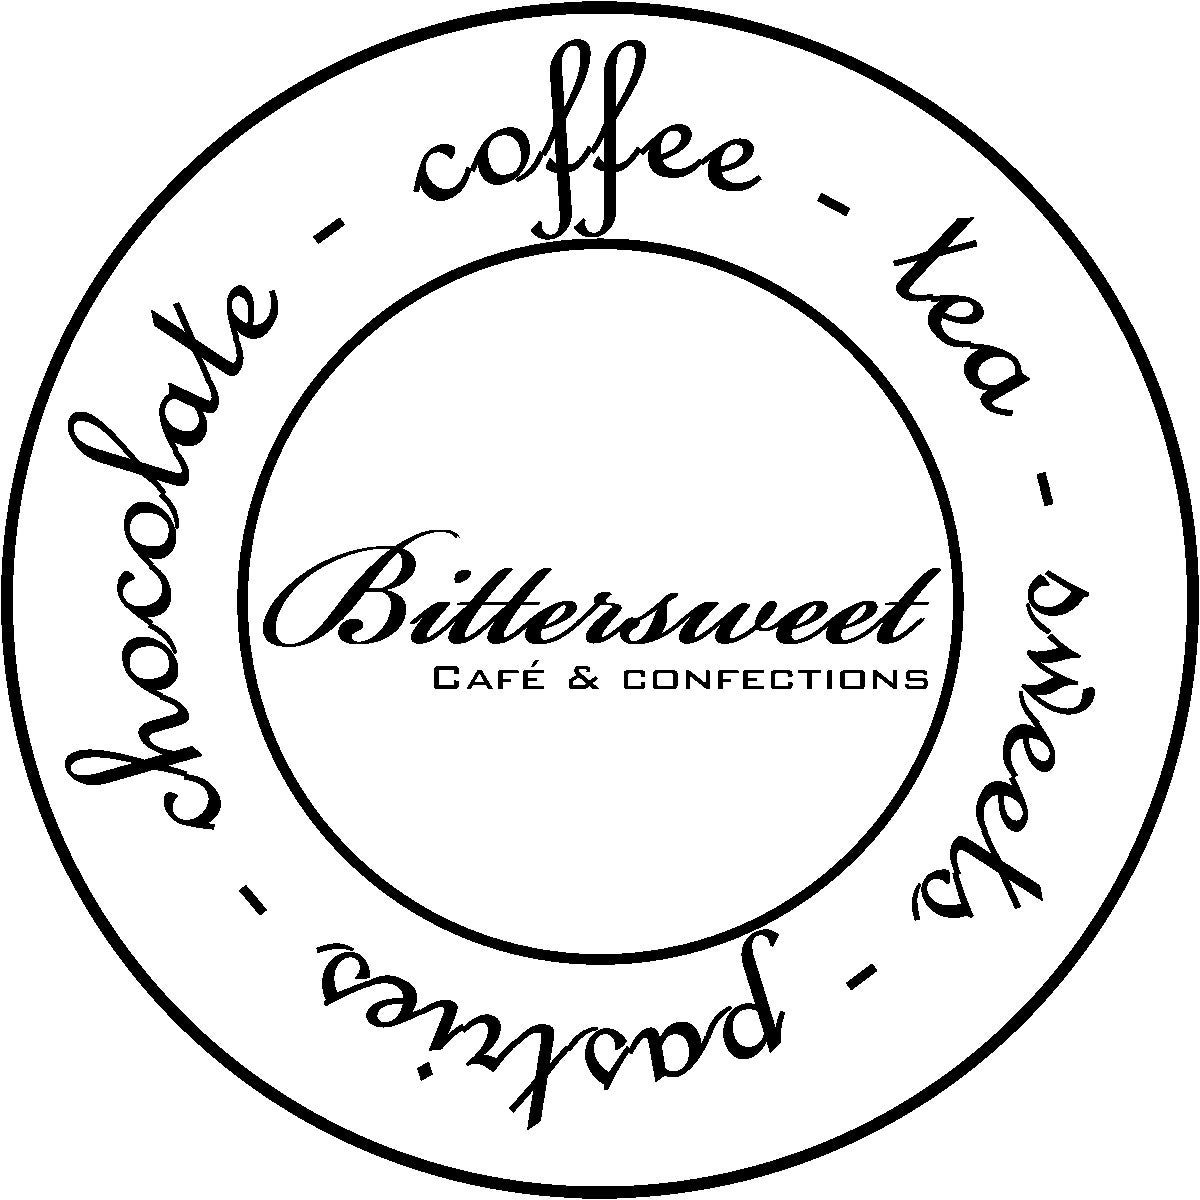 ESPRESSO menu - Bittersweet Cafe & Confections - Cafe in